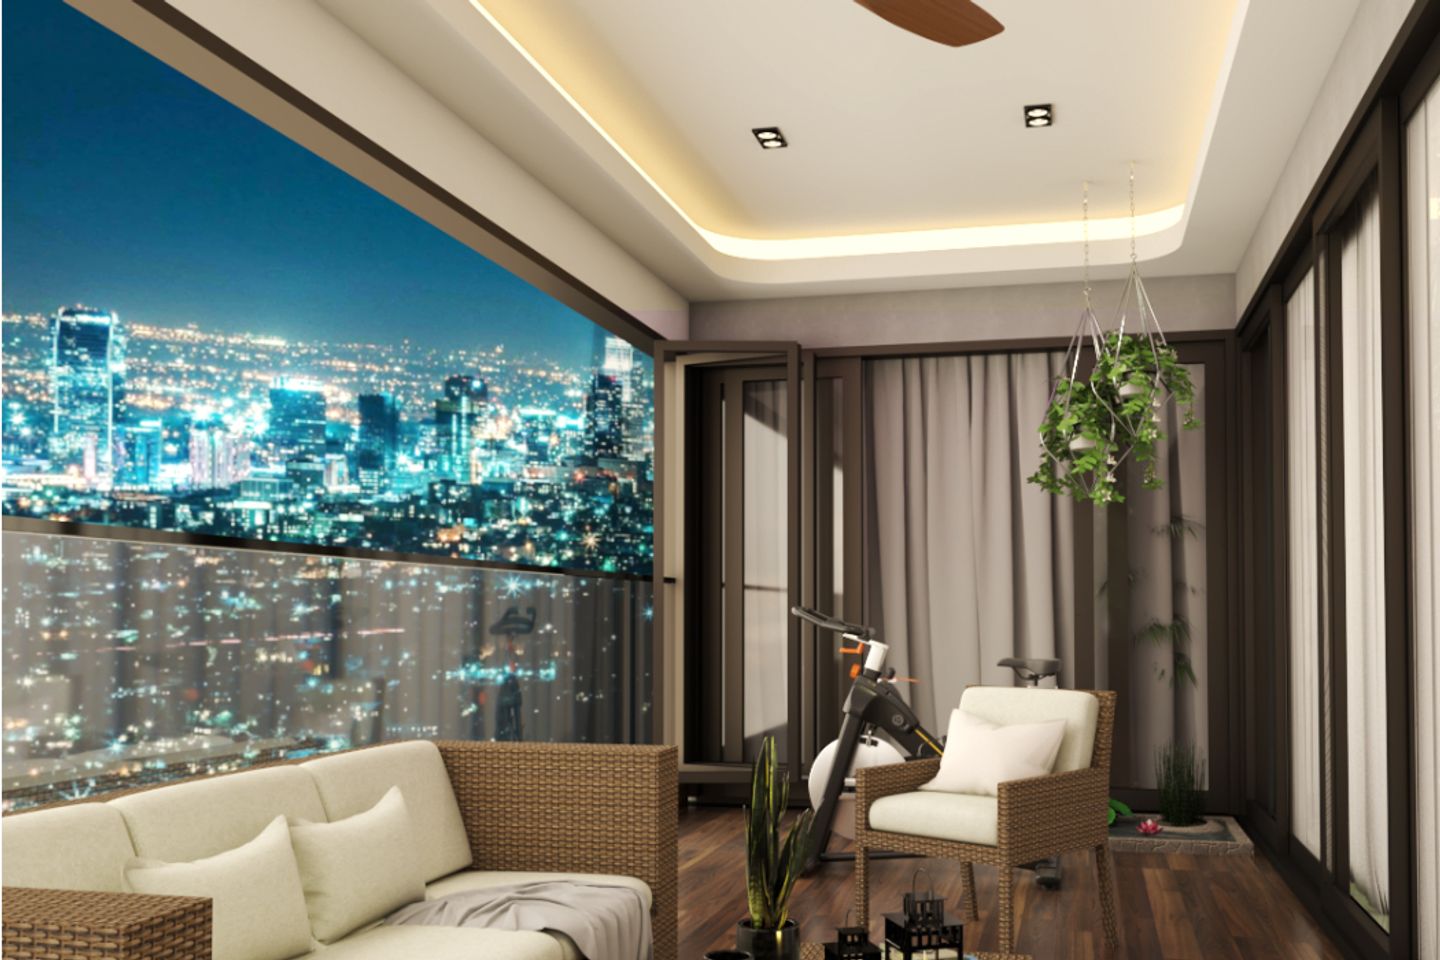 Modern False Ceiling Design With Spotlights And Cove Lights